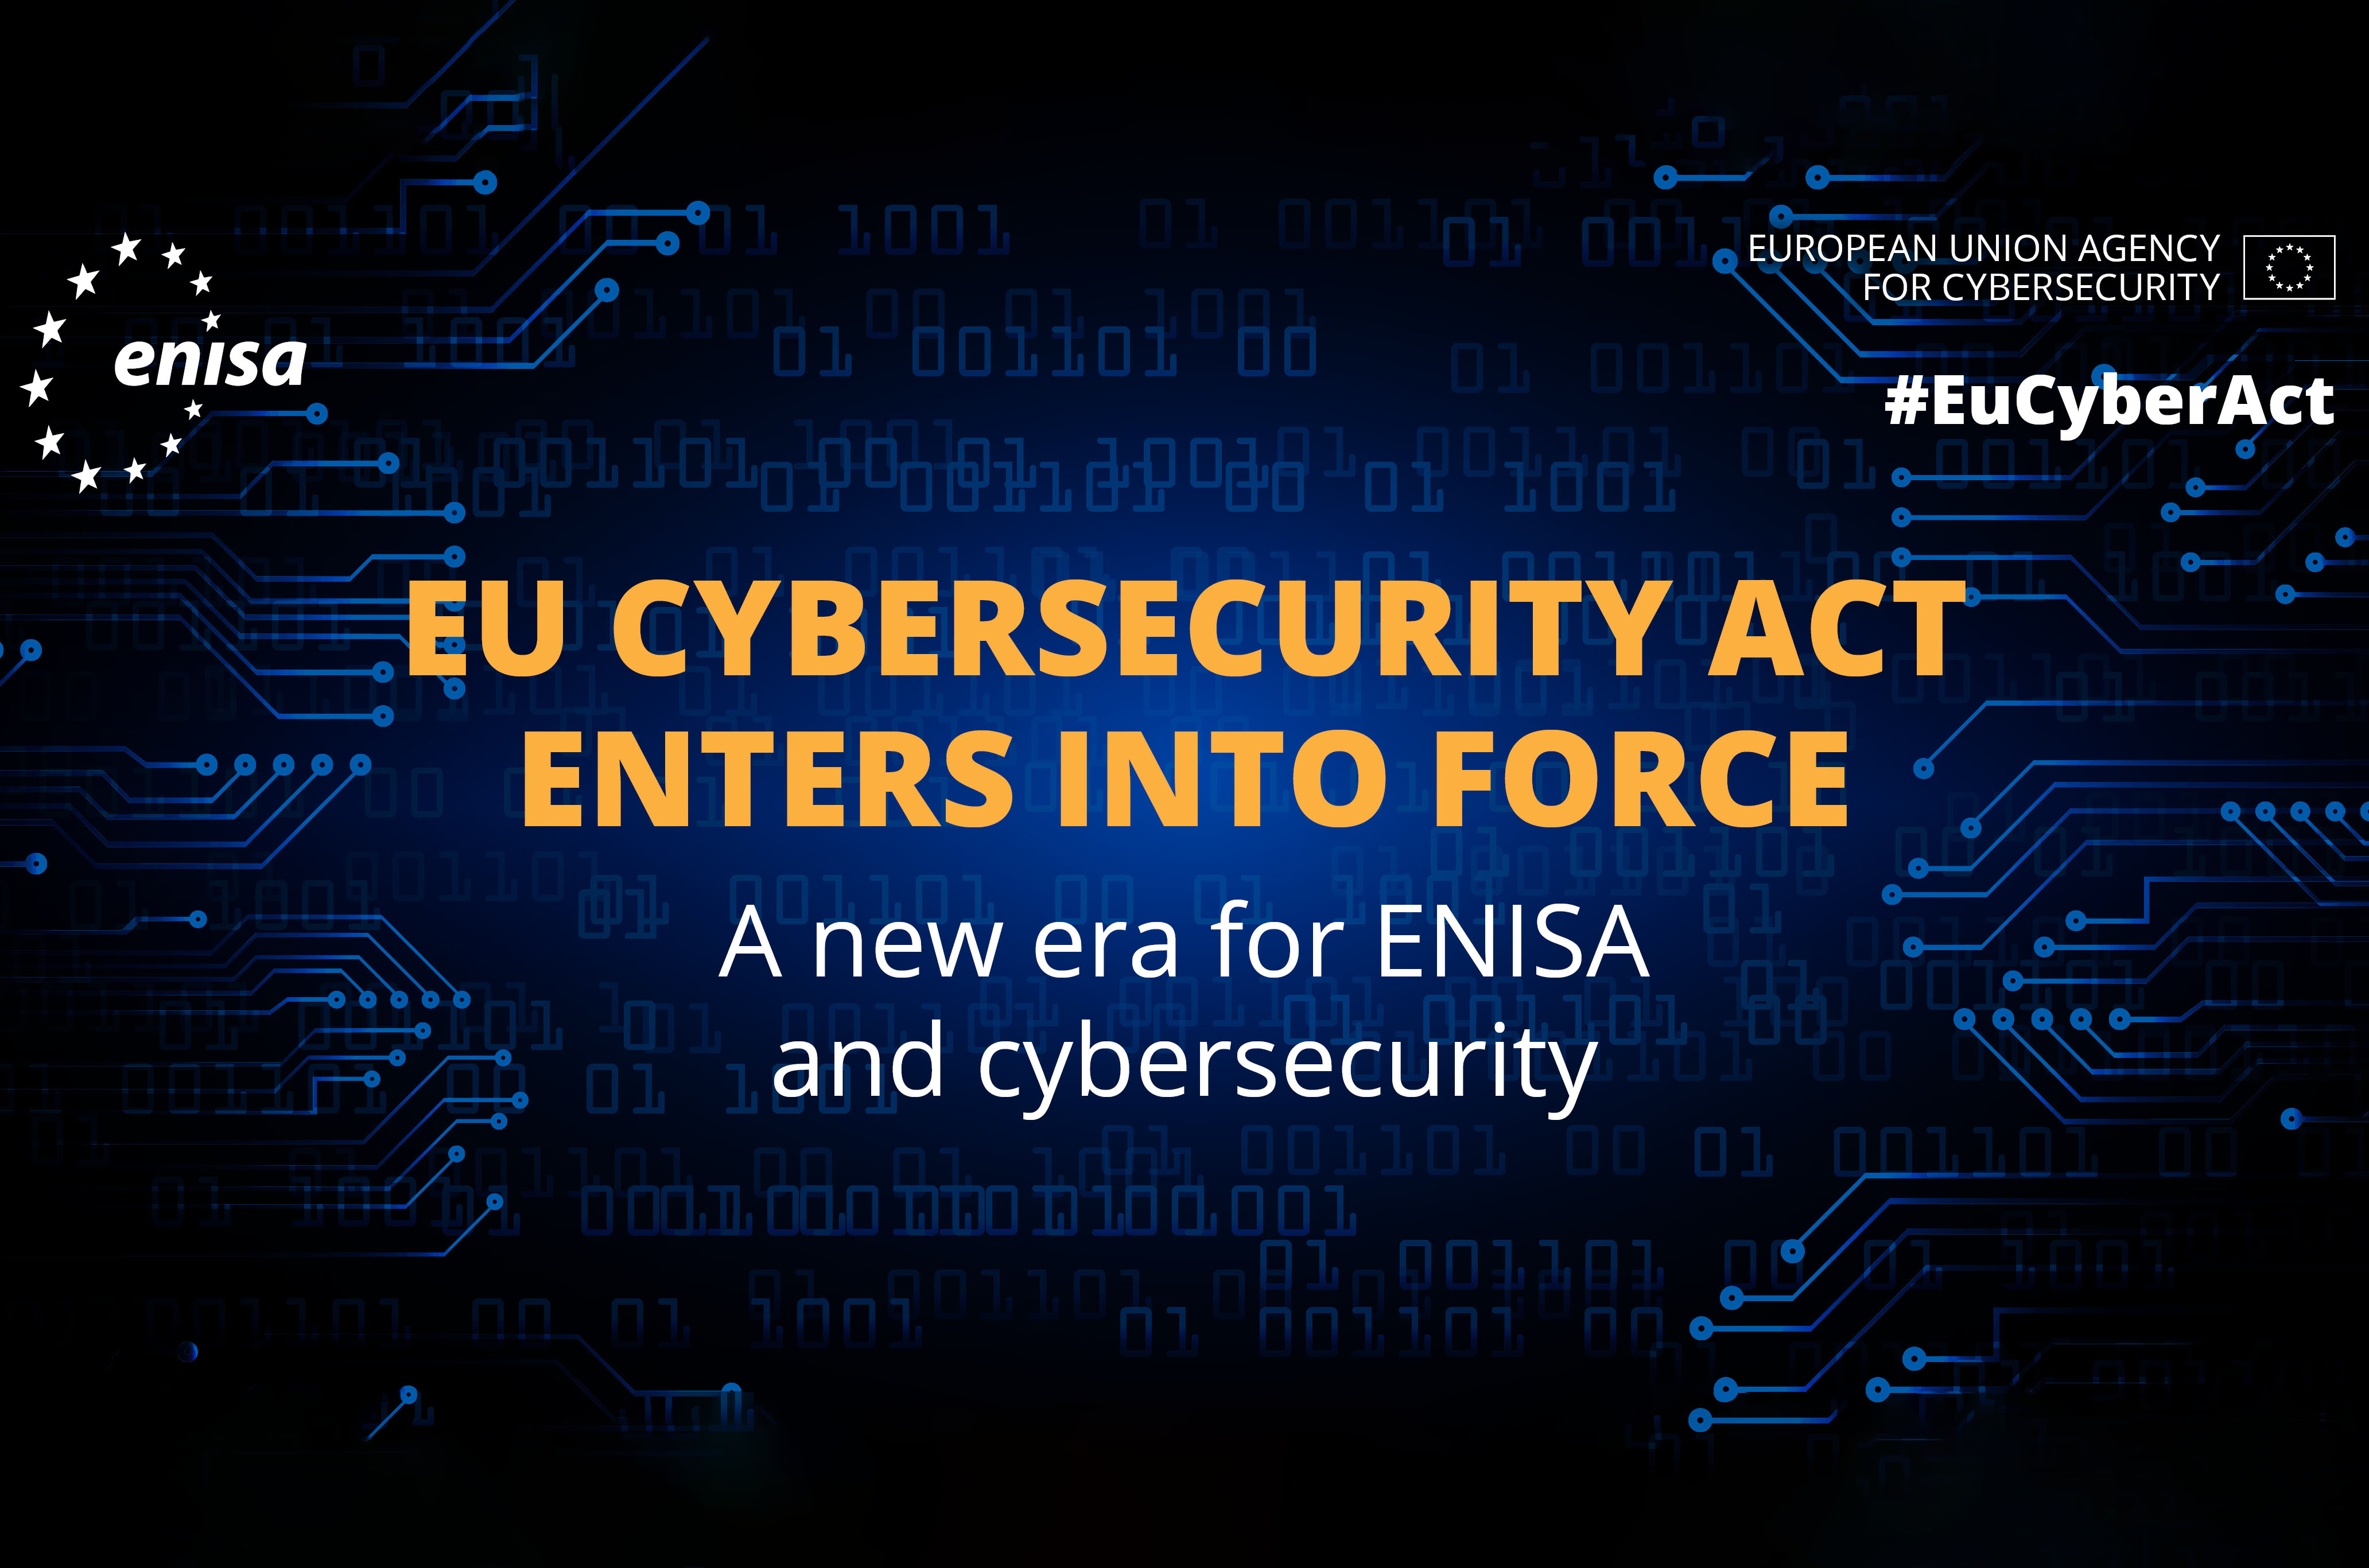 The European Union Agency for Cybersecurity A new chapter for ENISA